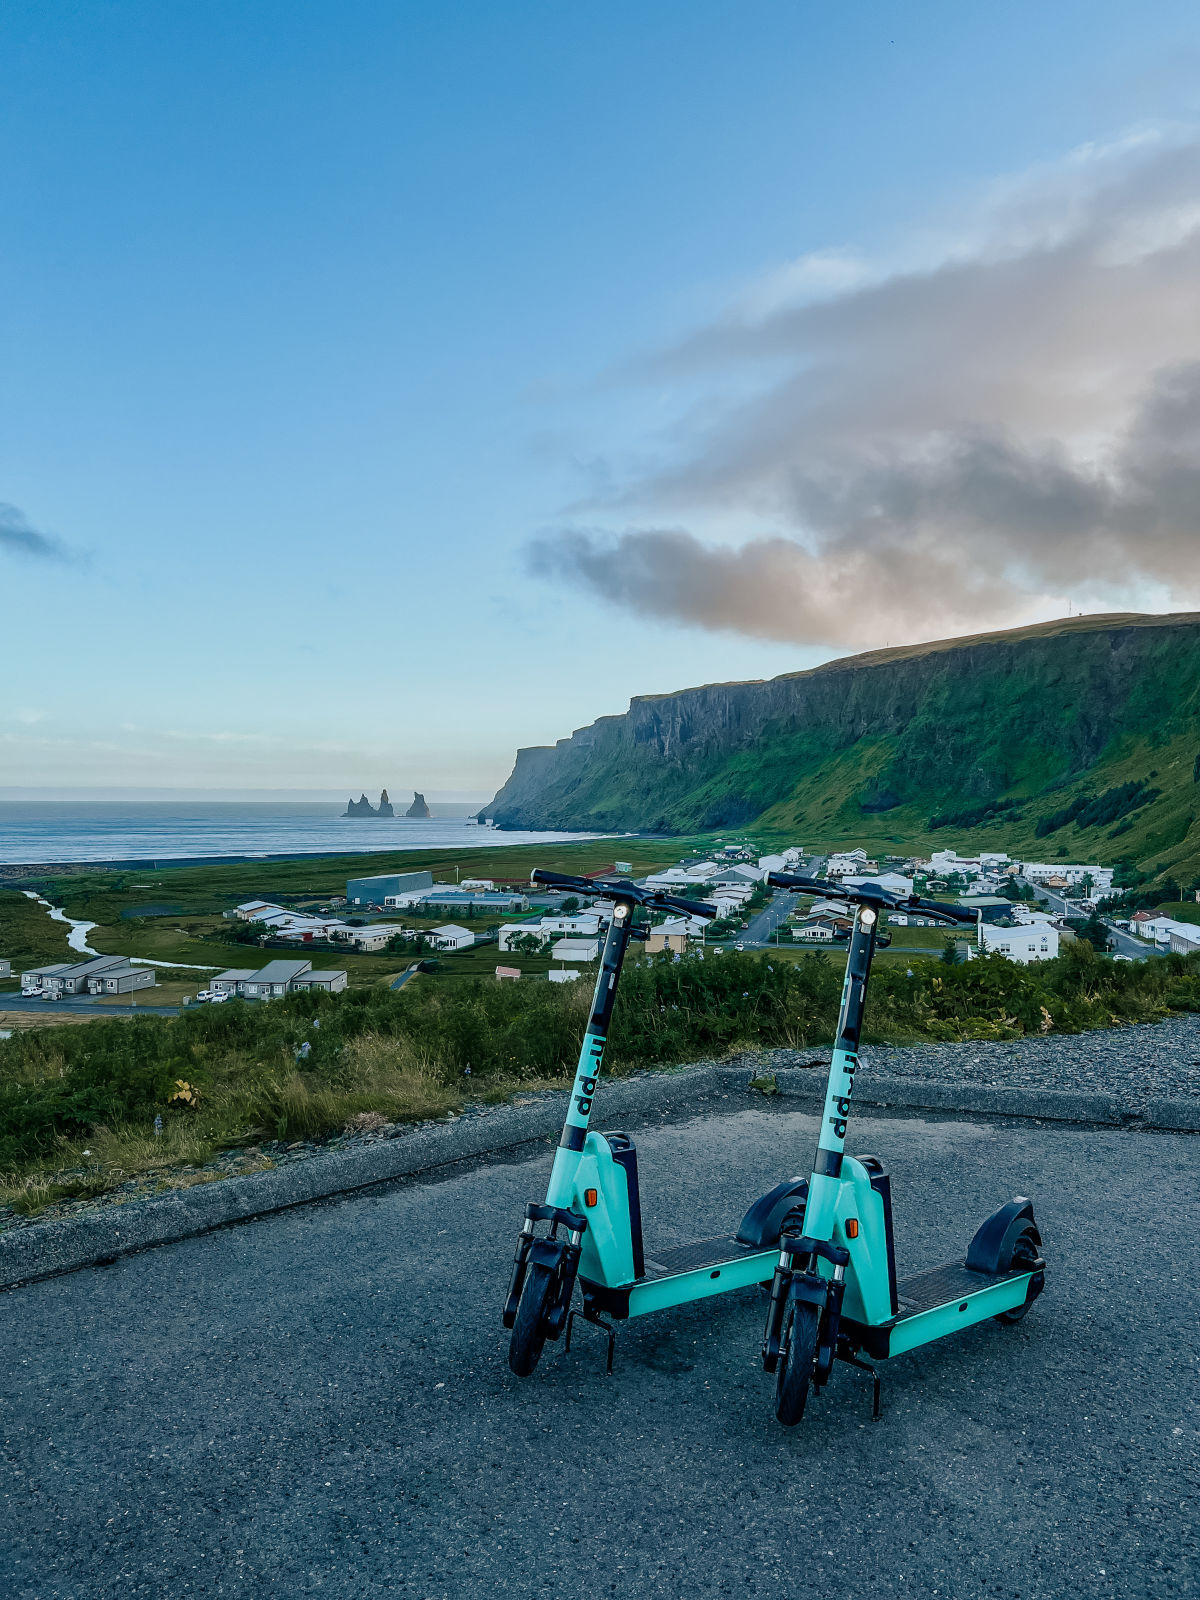 25 scooters launched in Vík in Mýrdalur during the summer of 2022, adding yet another exciting attraction for guests and visitors to this cool town on the southern coast of Iceland.